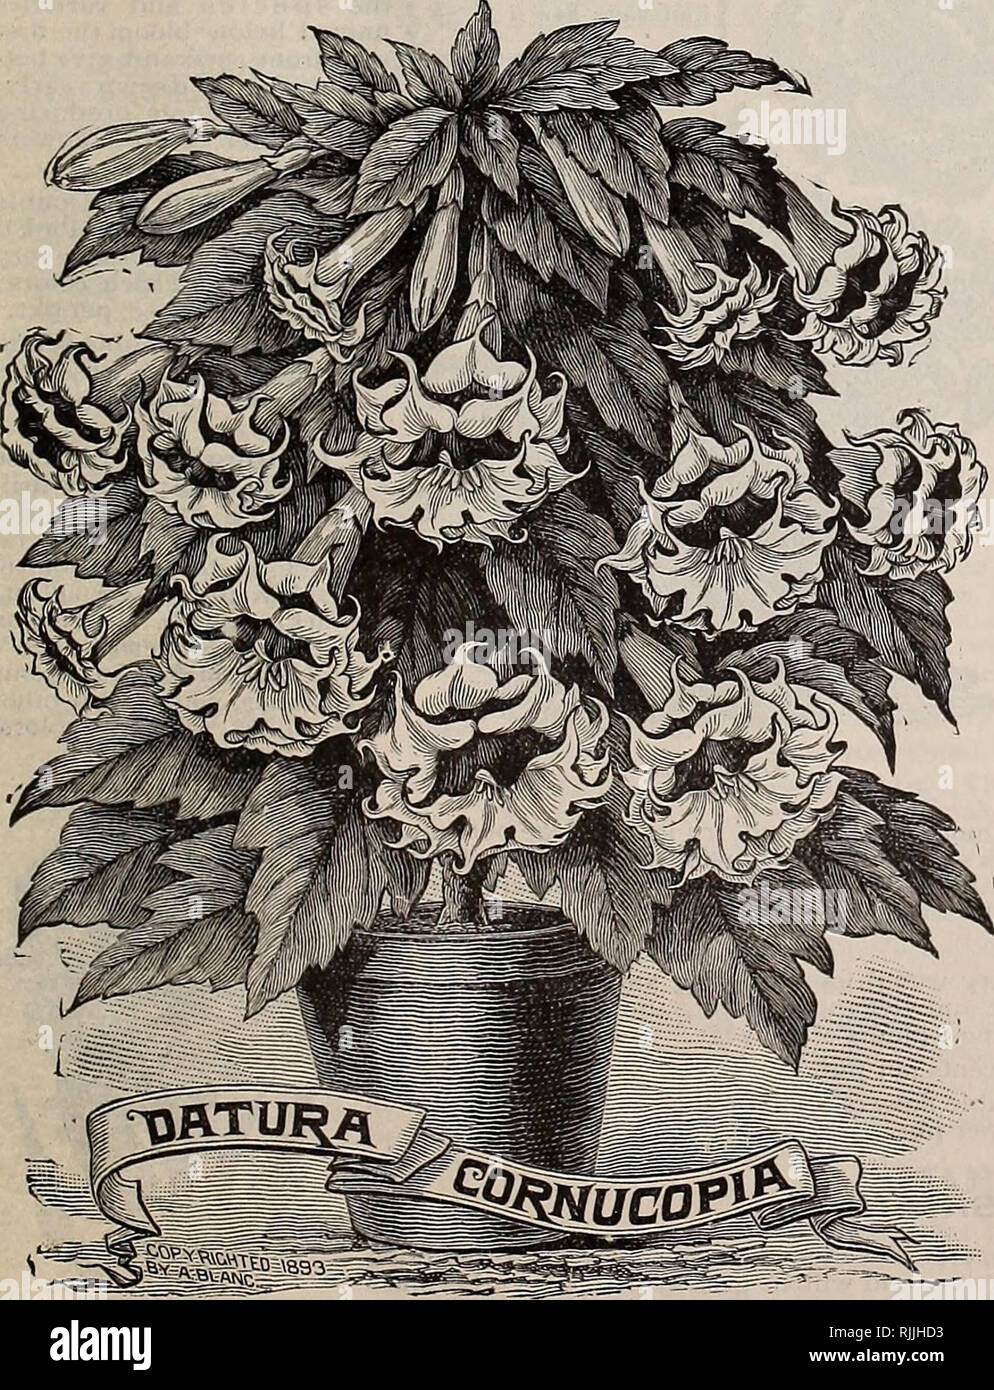 . Beckert's garden field &amp; flower seeds. Commercial catalogs Seeds; Vegetables Seeds Catalogs; Bulbs (Plants) Seeds Catalogs; Fruit Seeds Catalogs; Flowers Seeds Catalogs; Garden tools Catalogs. Chrysantkemuni carinatunt. 5 cents per pkt.. CAMPANULA SPECULUM. (Venus' Looking-Glass.) A pretty, hardy annual form of the Bellflower, covered with flowers of rich deep blue. 5 cts. per pkt. IE^For other varieties of Campanula, see Perennials. CENTRANTHUS MACROSIPHON. Pretty, compact-growing plants, about a foot high, with corymbs of red or white flowers, produced freely all summer. Much used for Stock Photo